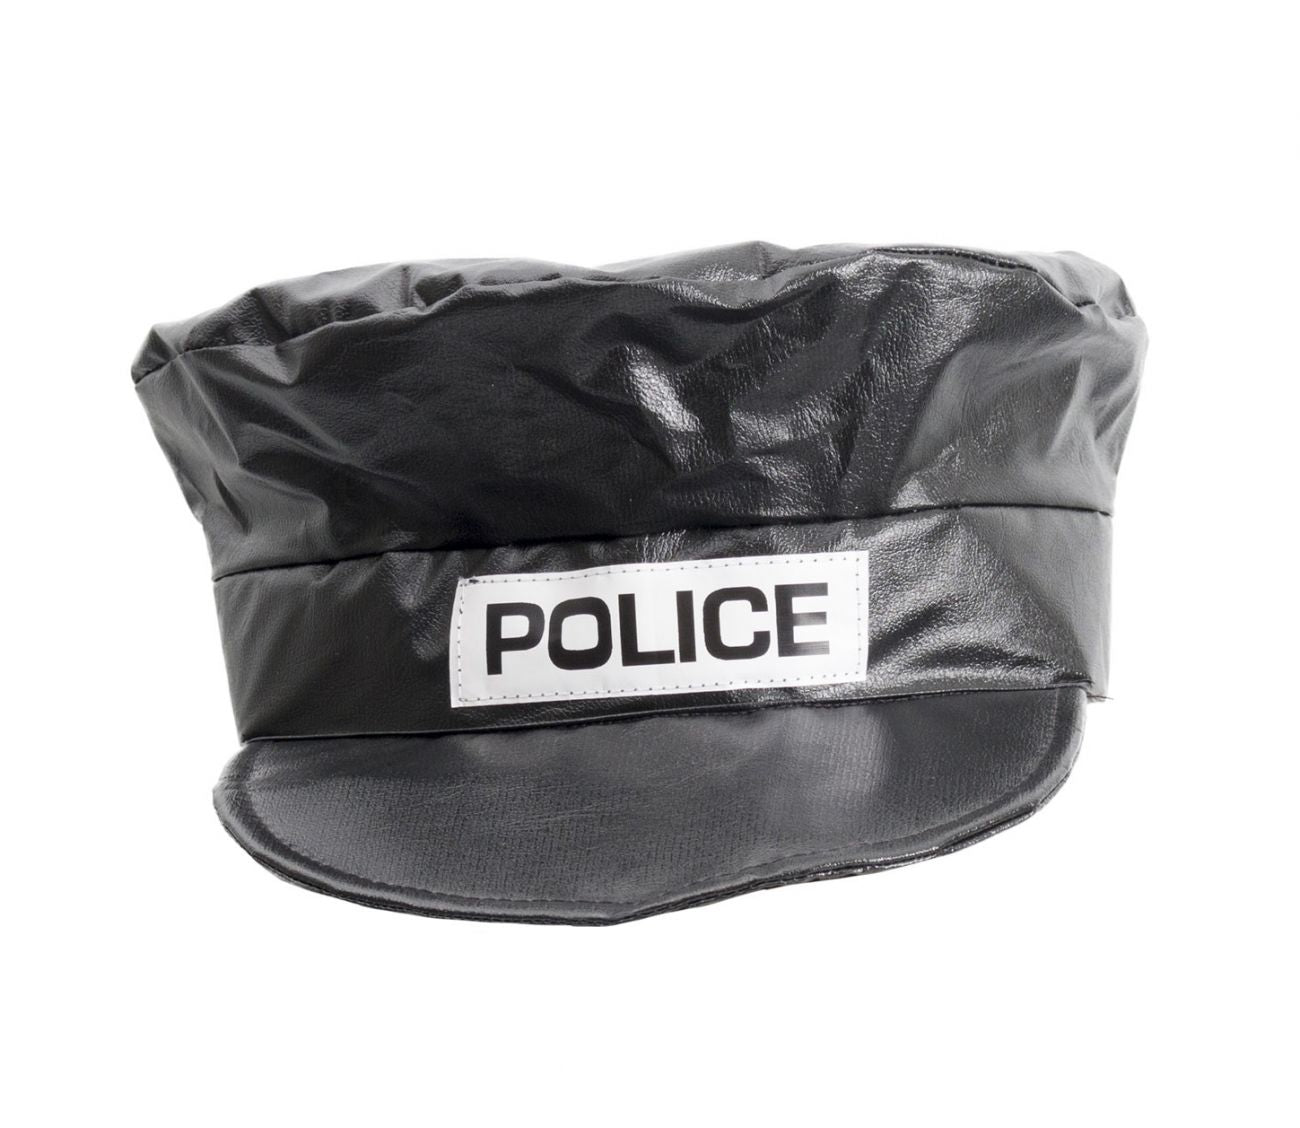 CandyMan 99357 Police Costume Outfit